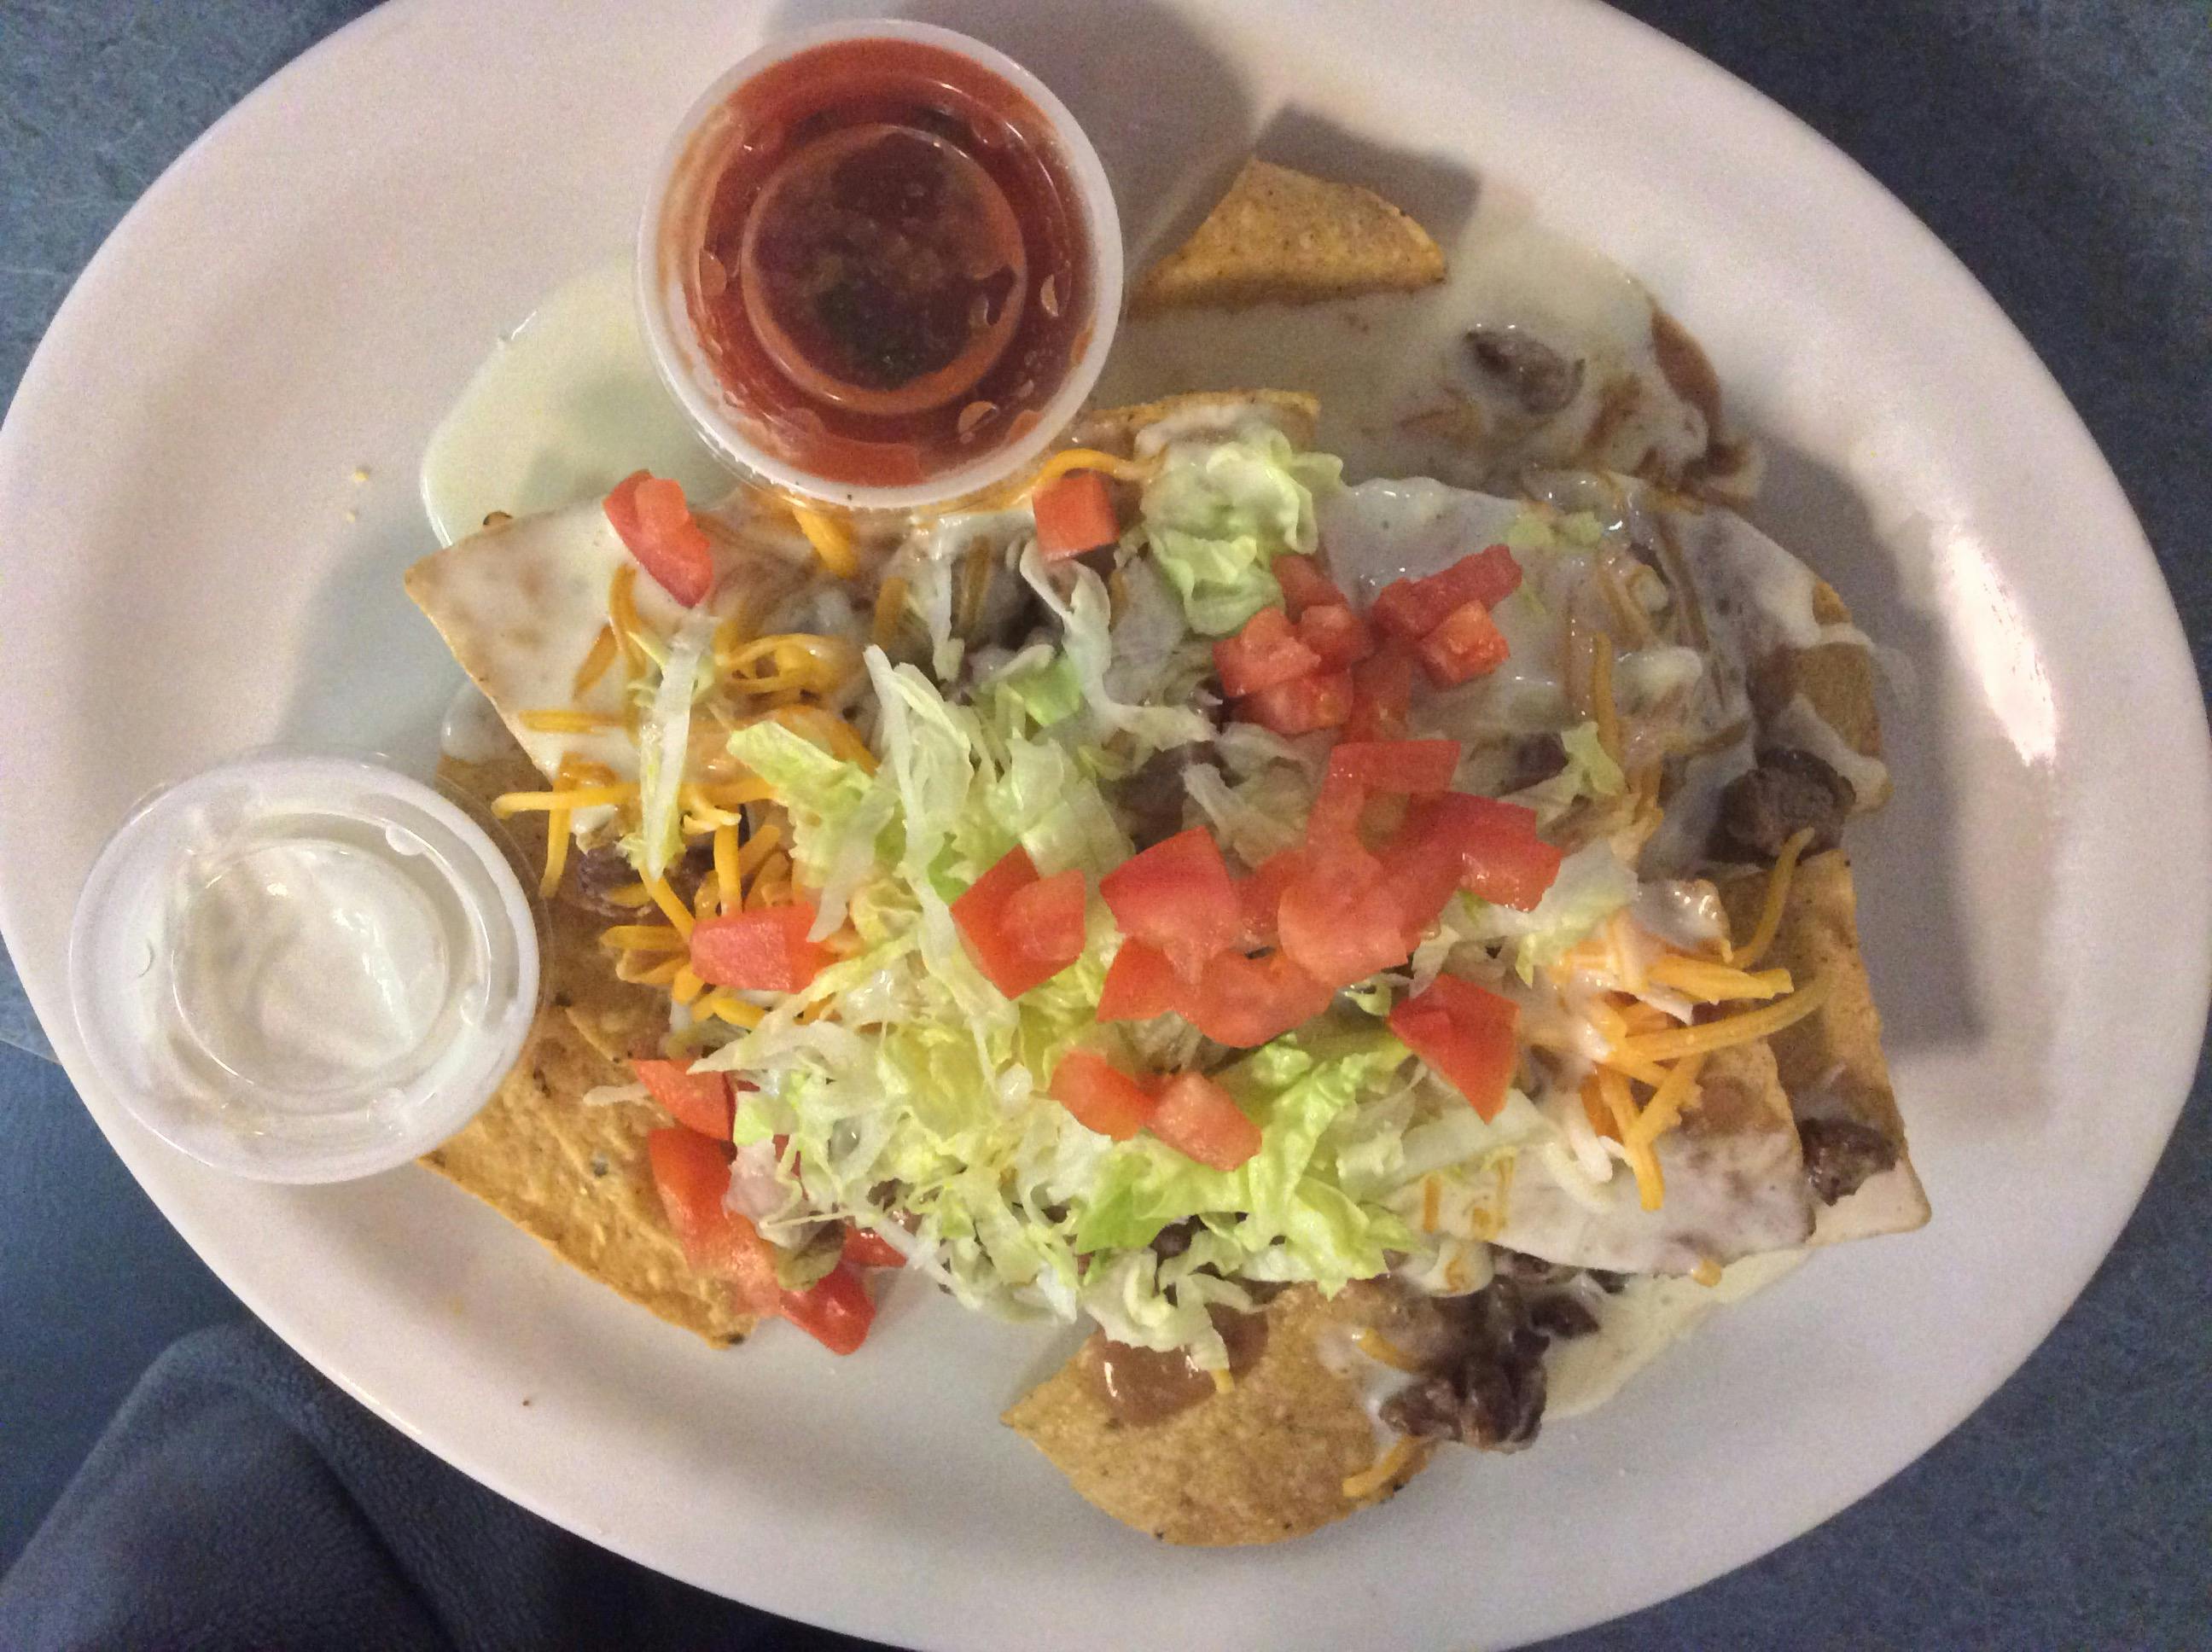 House Nachos from The Funny Burrito in Appleton, WI